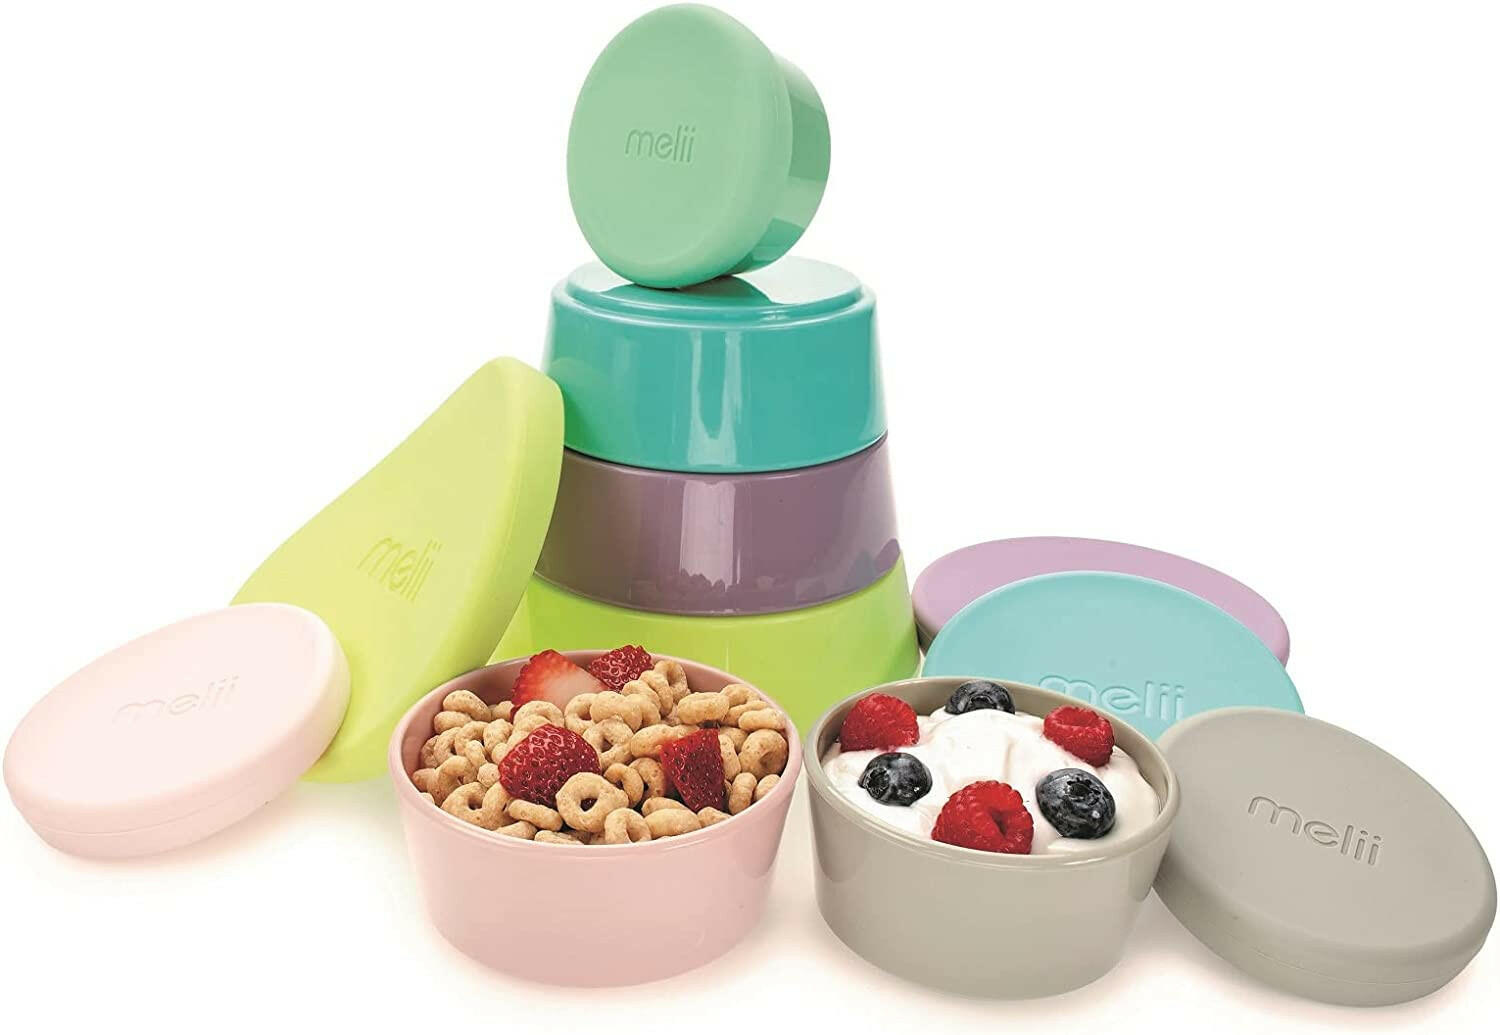 Melii Stacking & Nesting Containers with Silicone Lids - 6 Containers.